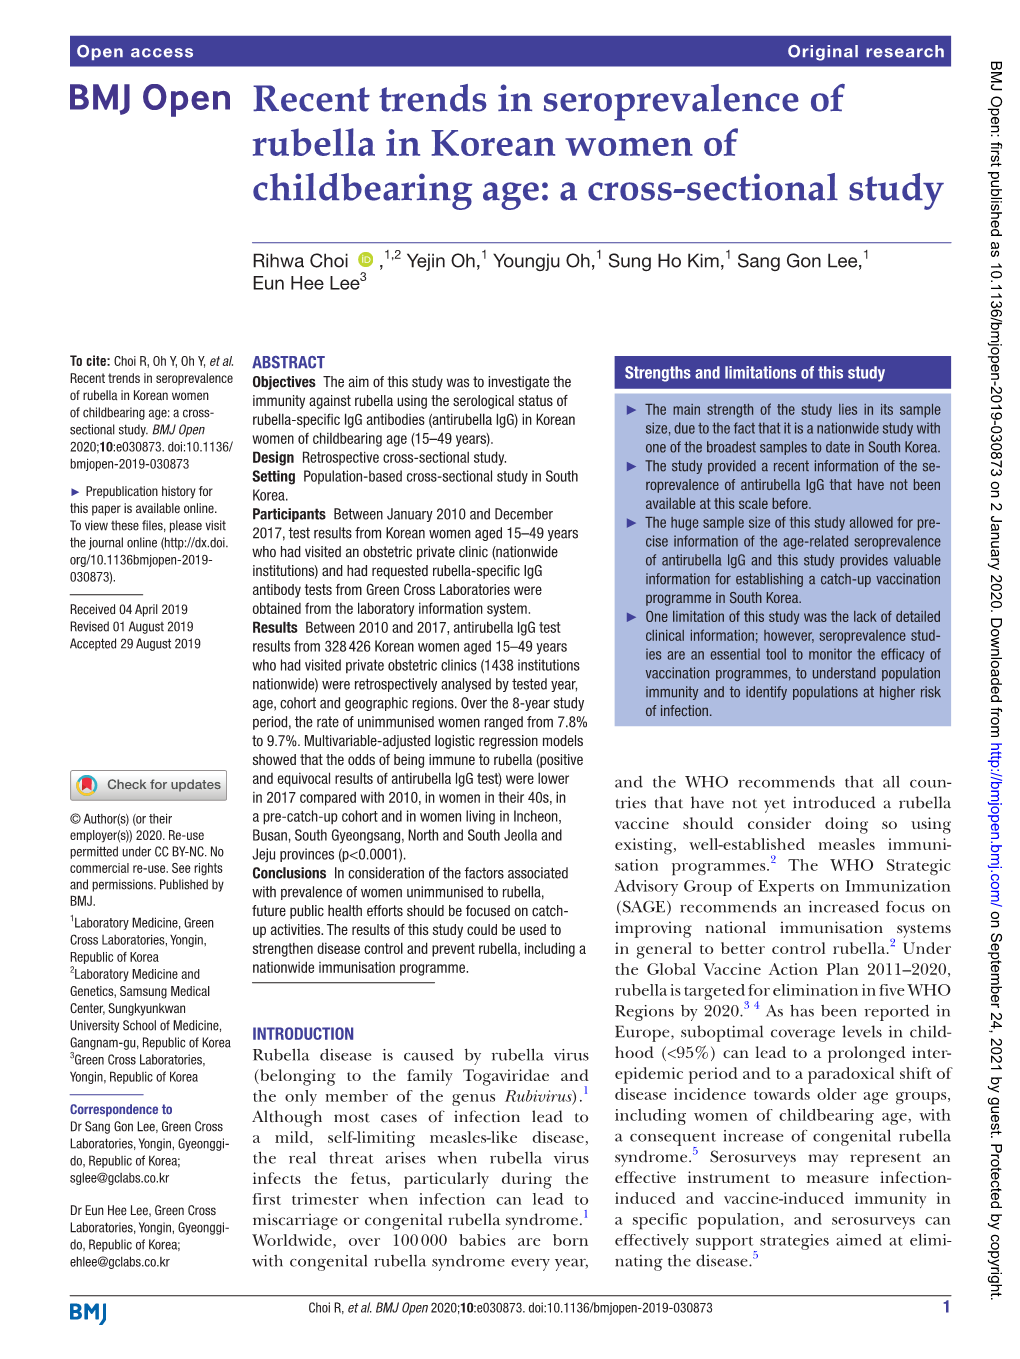 Recent Trends in Seroprevalence of Rubella in Korean Women of Childbearing Age: a Cross-­Sectional Study